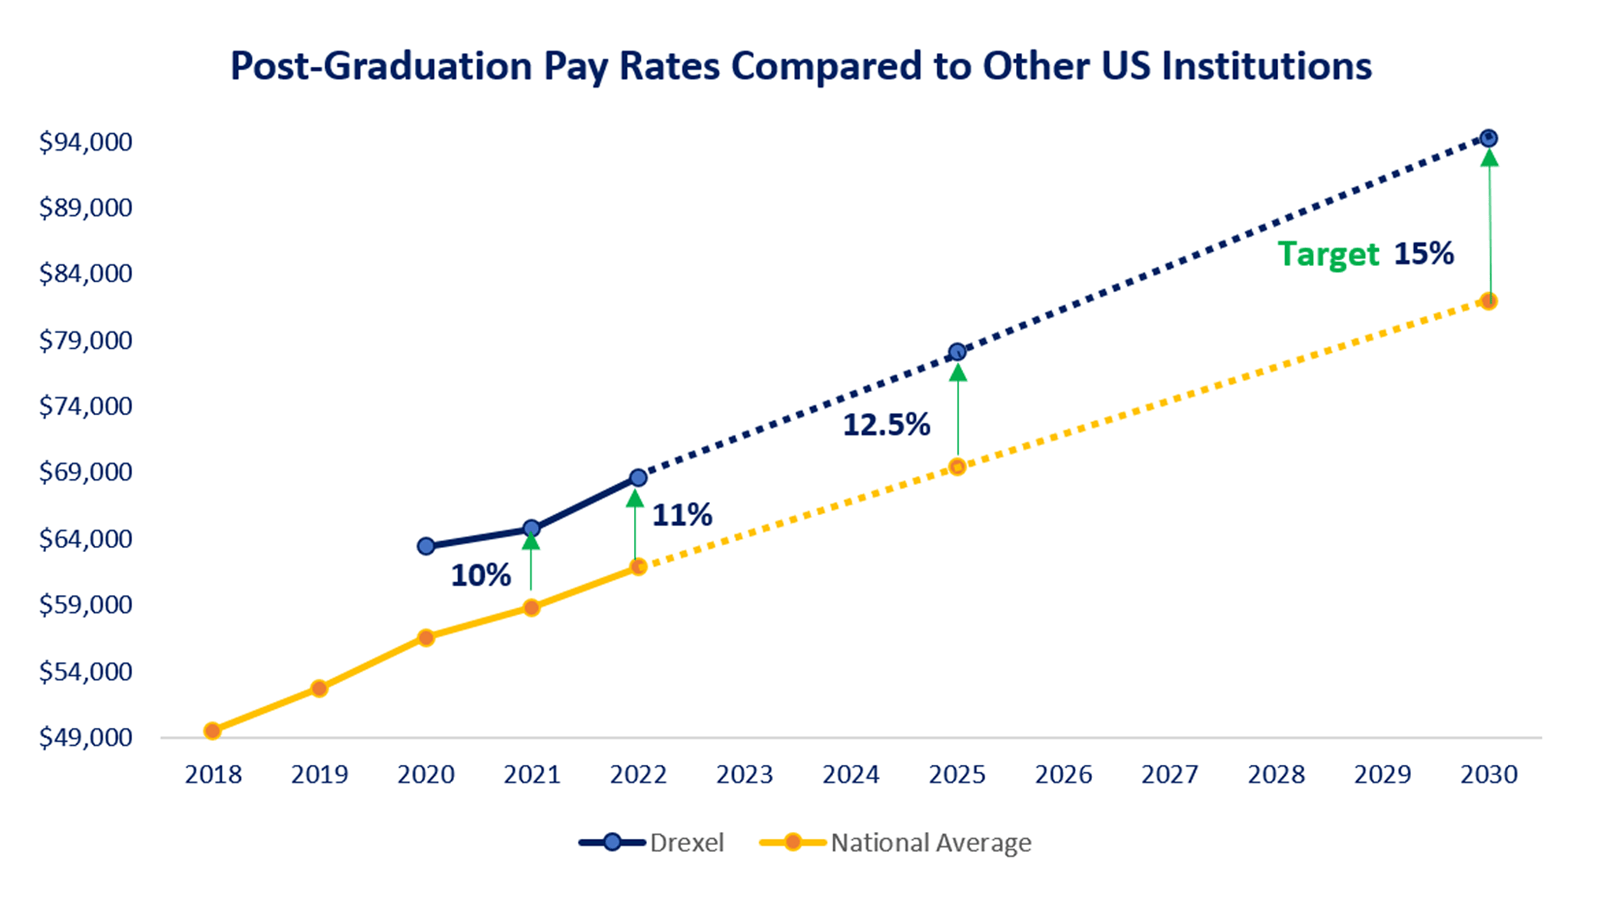 According to the National Association of Colleges and Employers (NACE) September 2022 Salary Survey, post-graduation pay rates of Drexel University students are 11% above the national average.  Through the Student Empowerment imperative, the goal is to increase Drexel University post-graduation pay rates to 15% above the national average by 2030. 